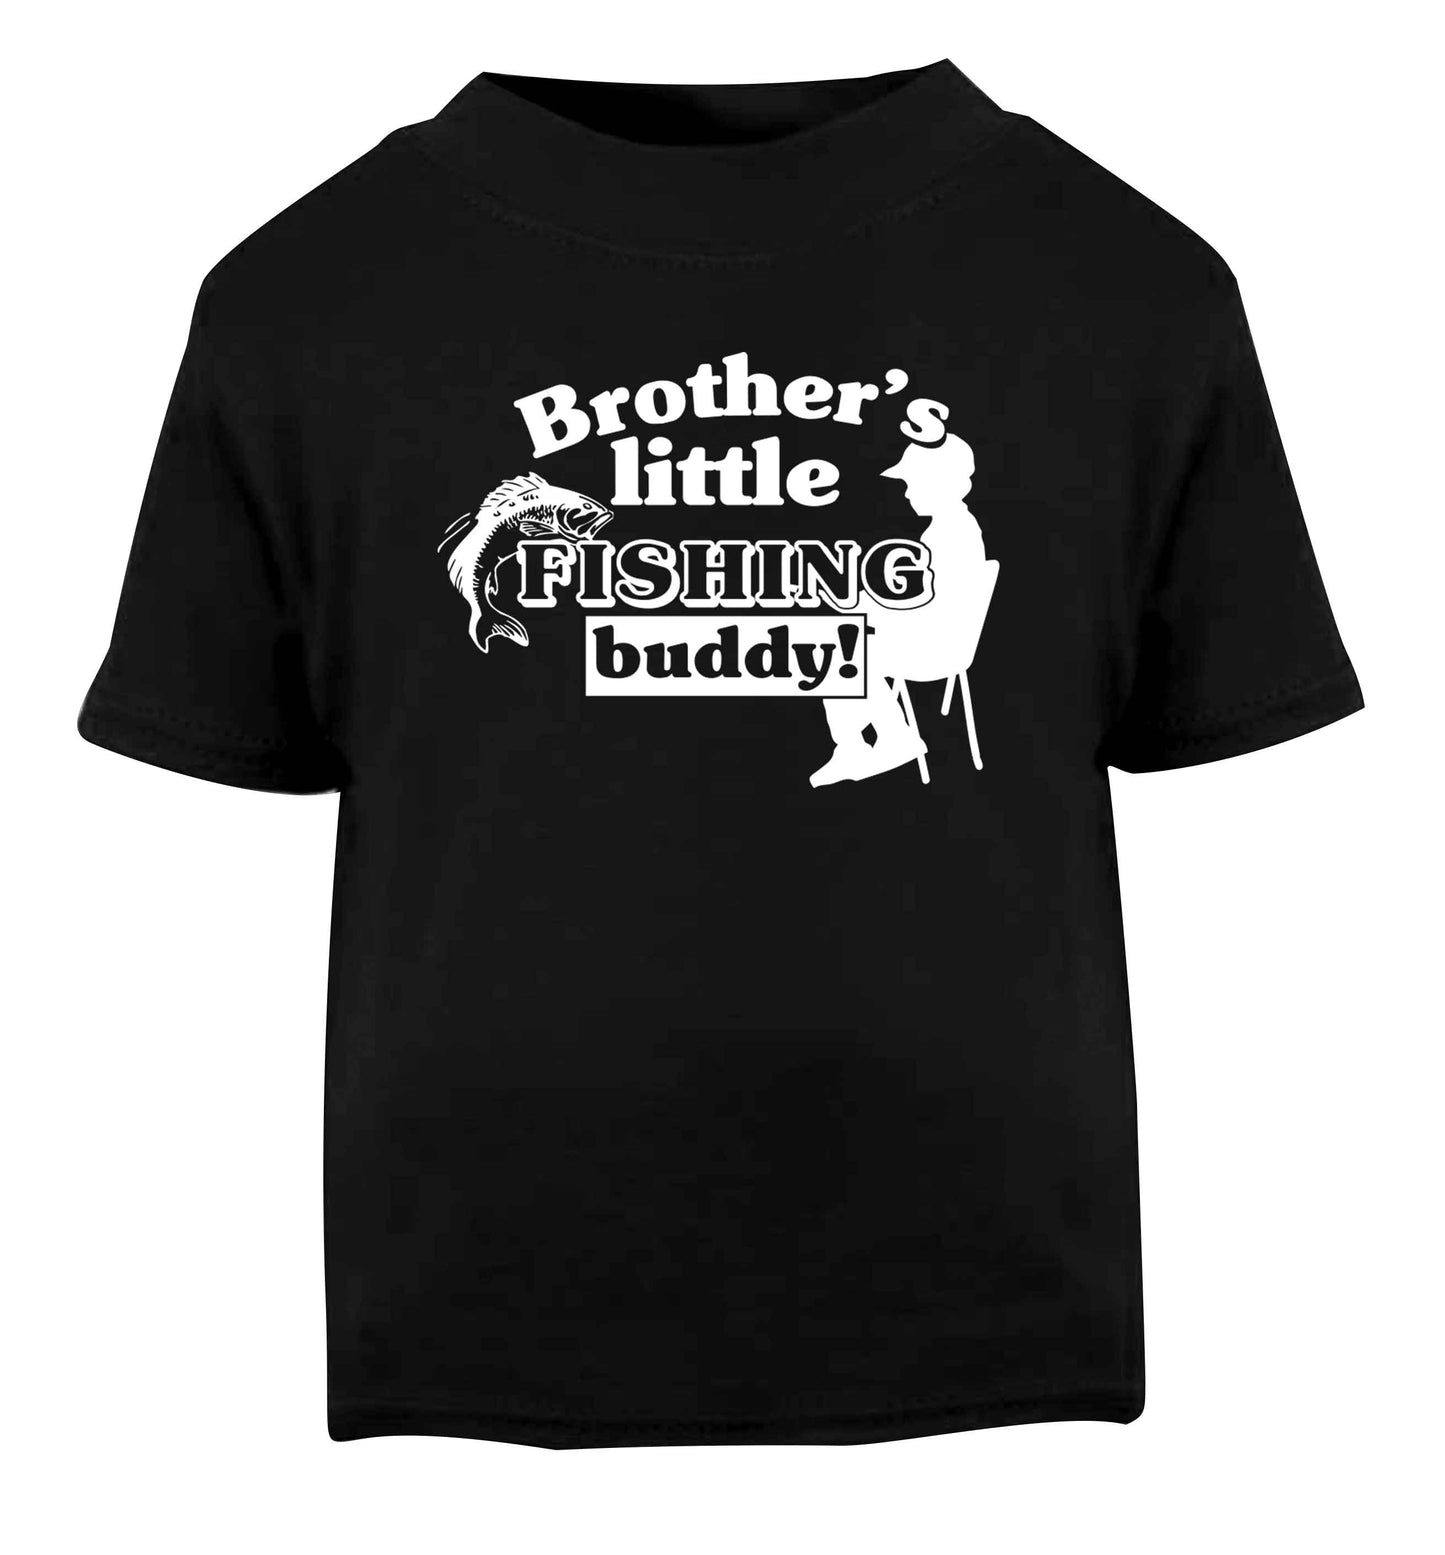 Brother's little fishing buddy Black Baby Toddler Tshirt 2 years